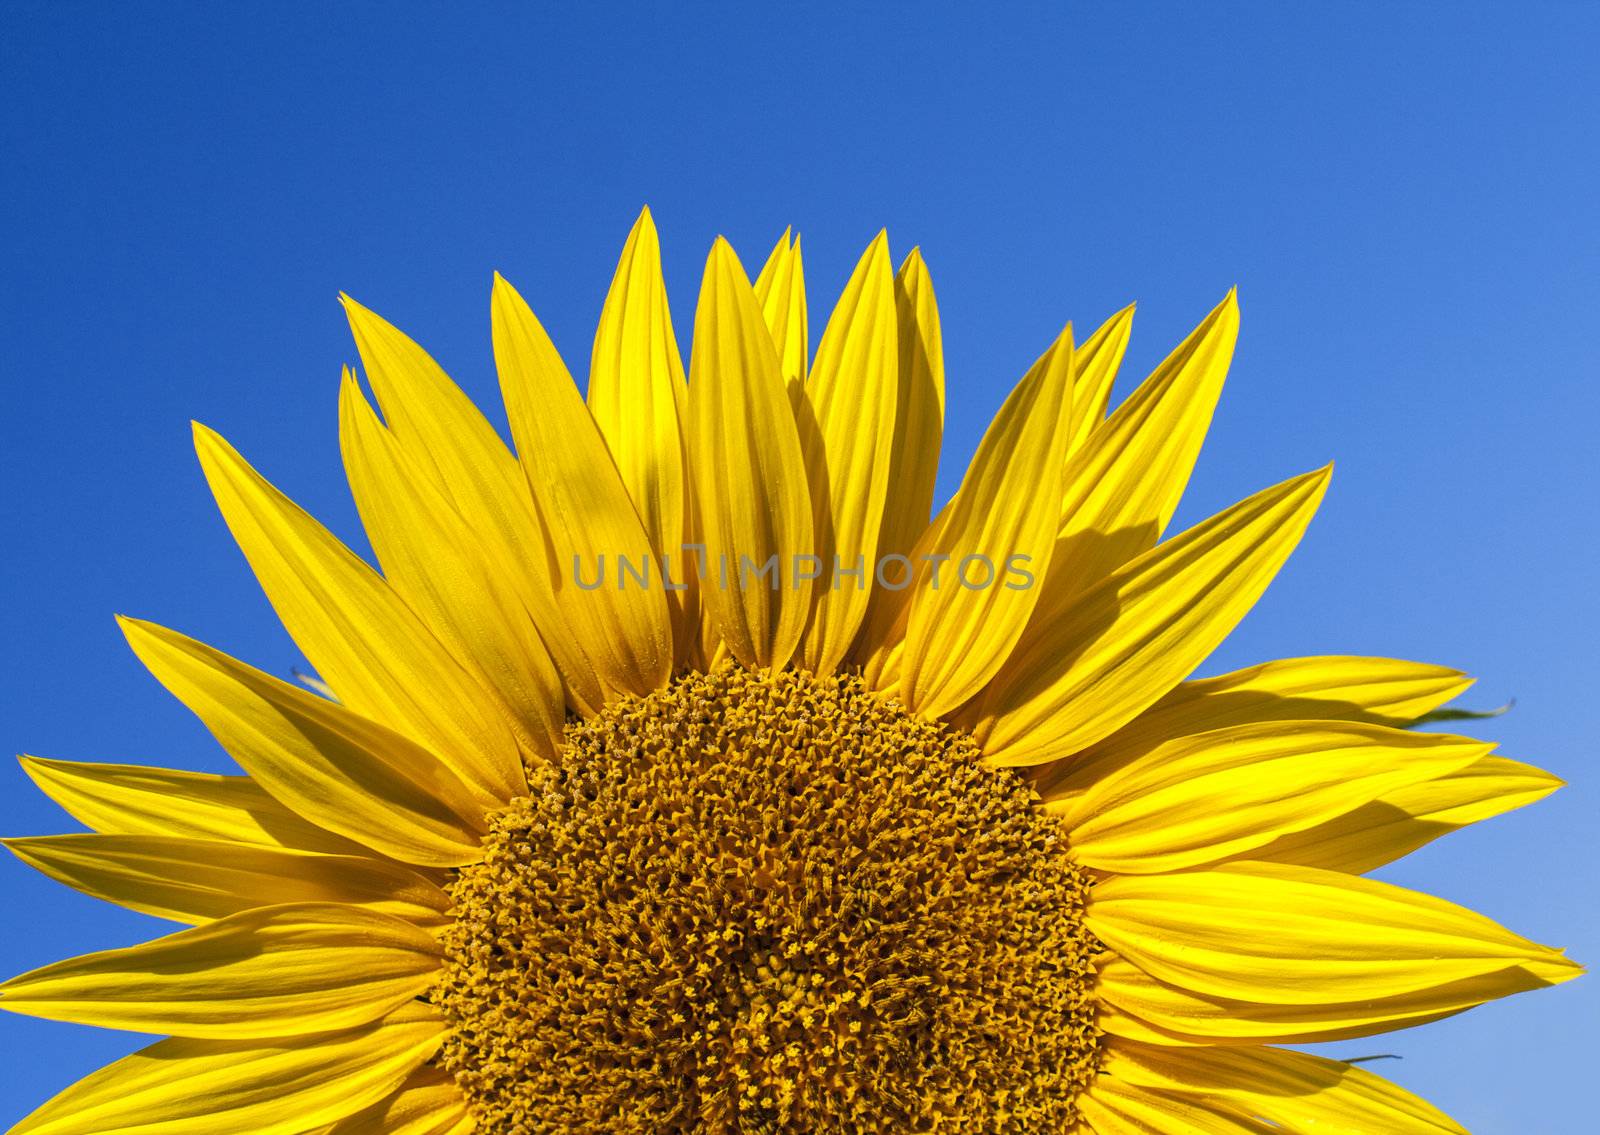 Fully blossomed sunflower by anelina